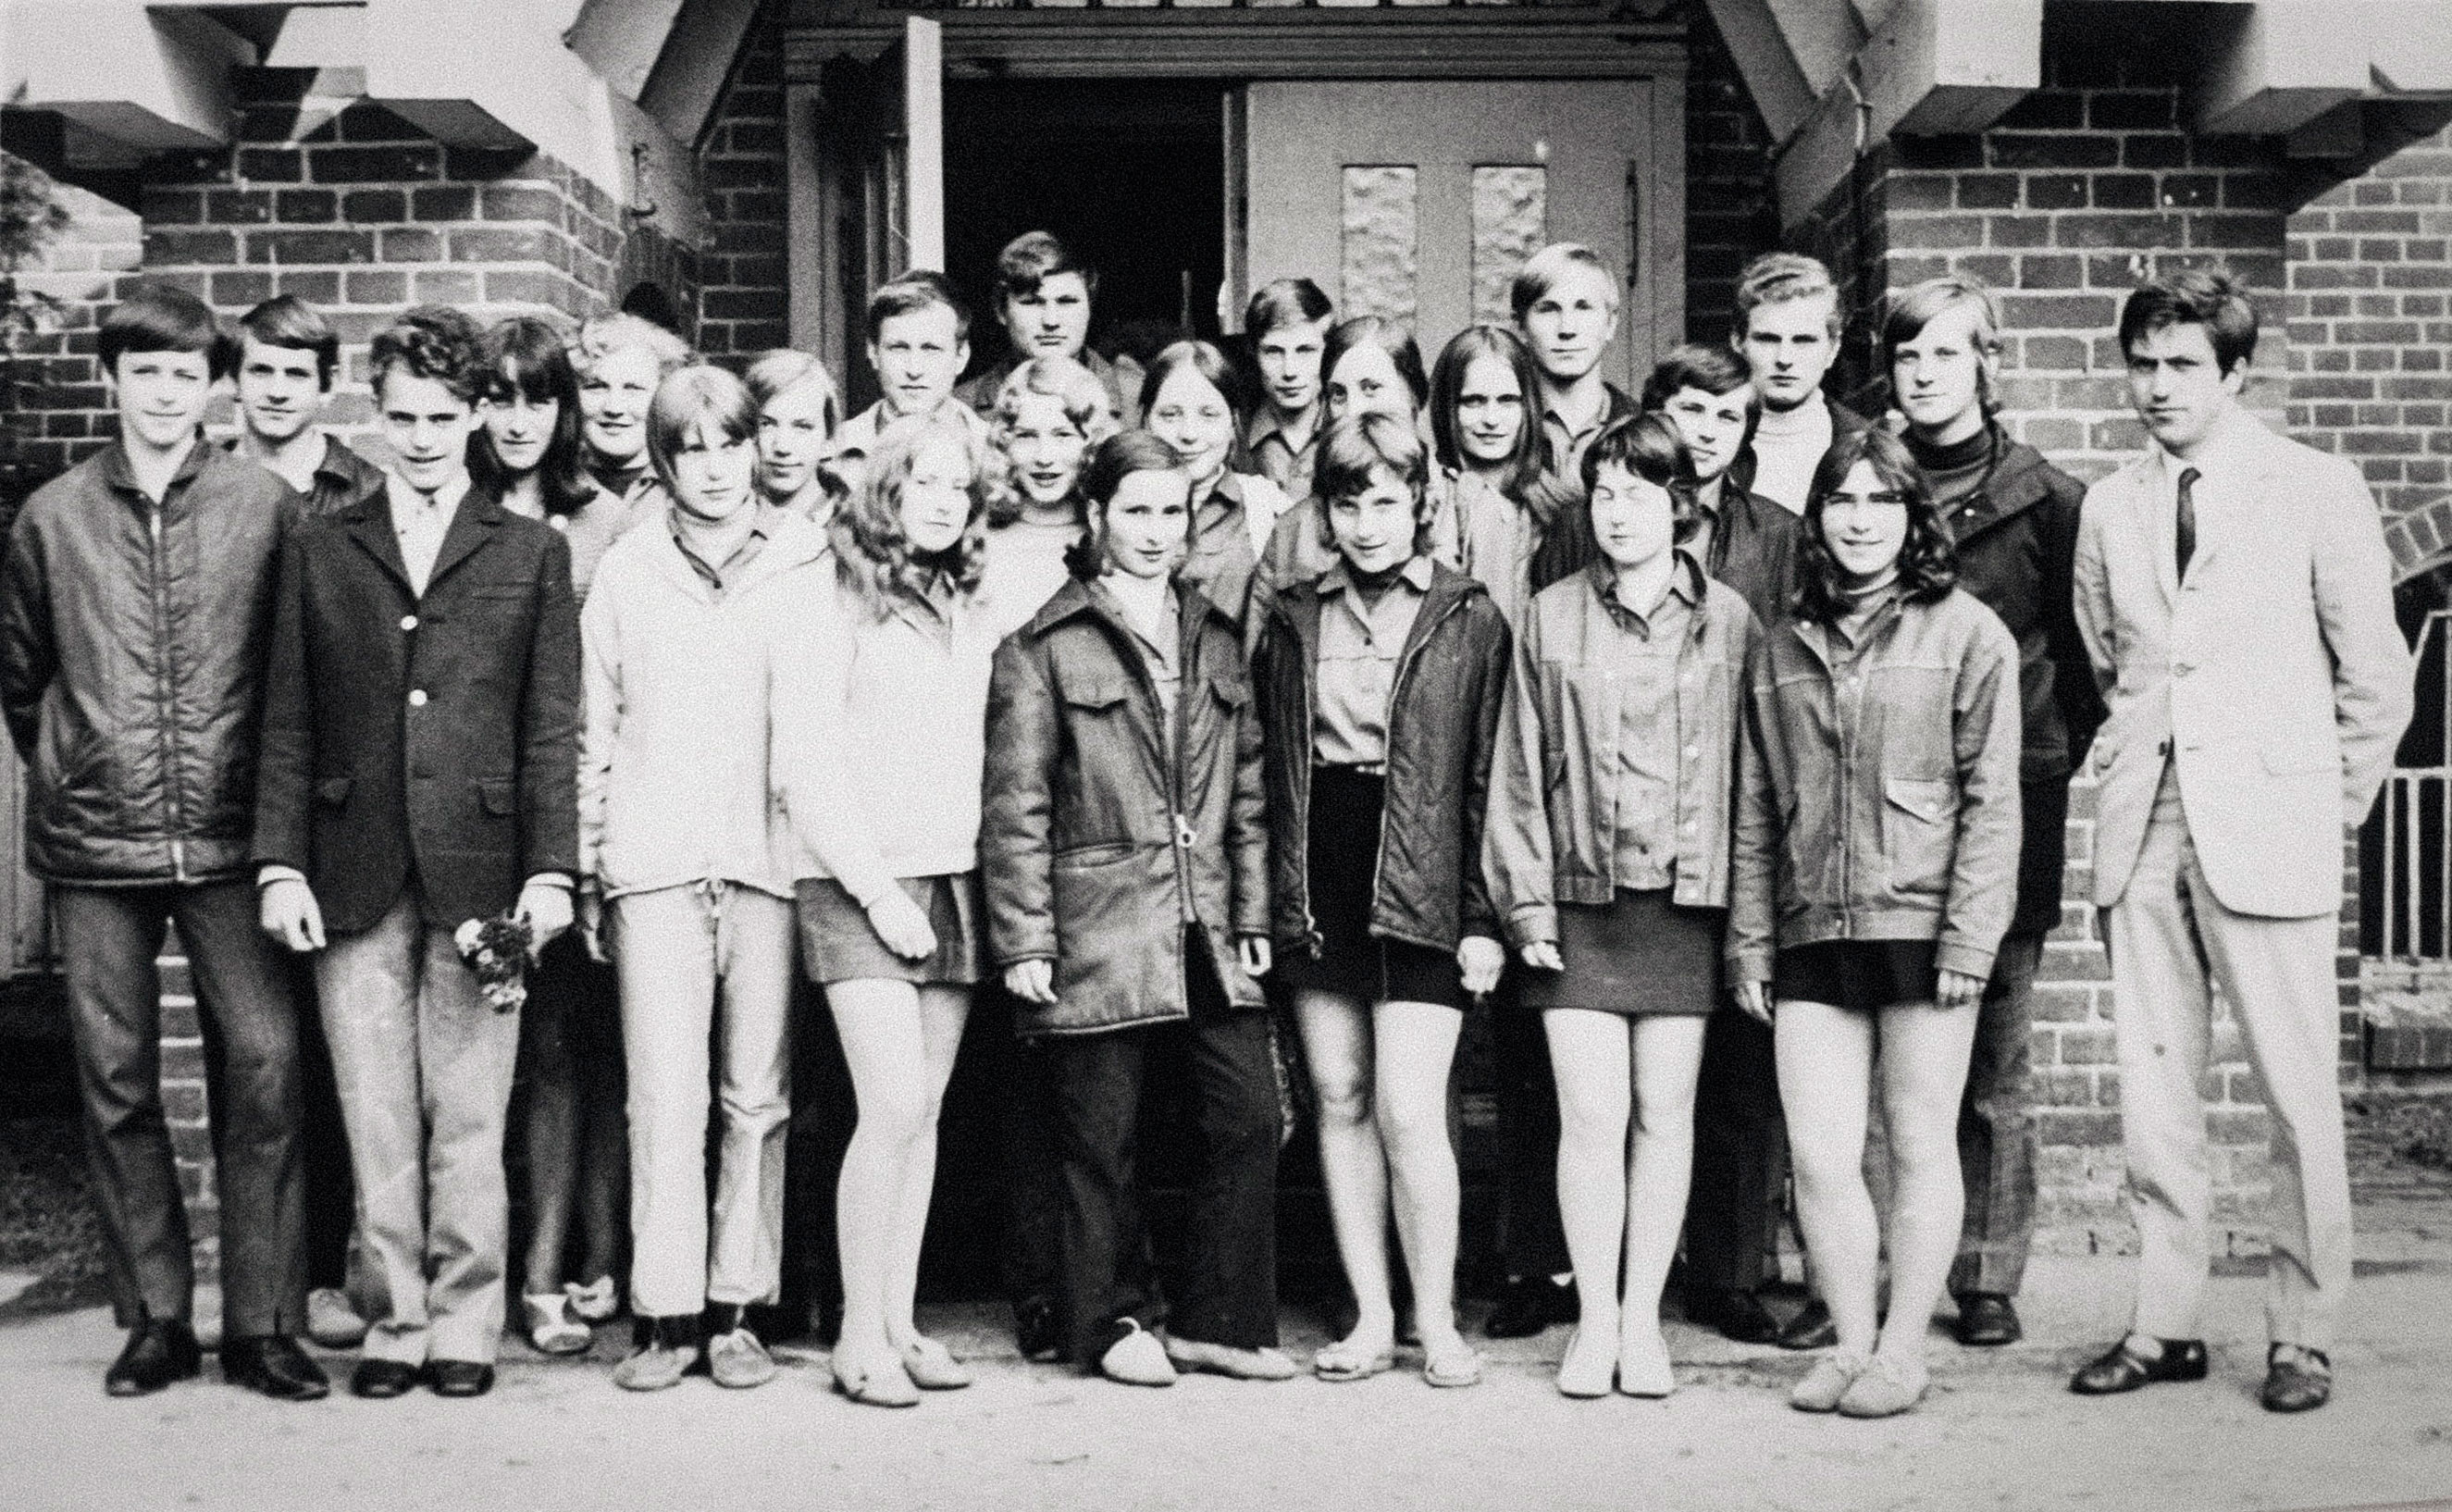 Angela Kasner (center, second row) in a class photo from 1971 of the Advanced High School (EOS) in Templin, Germany.